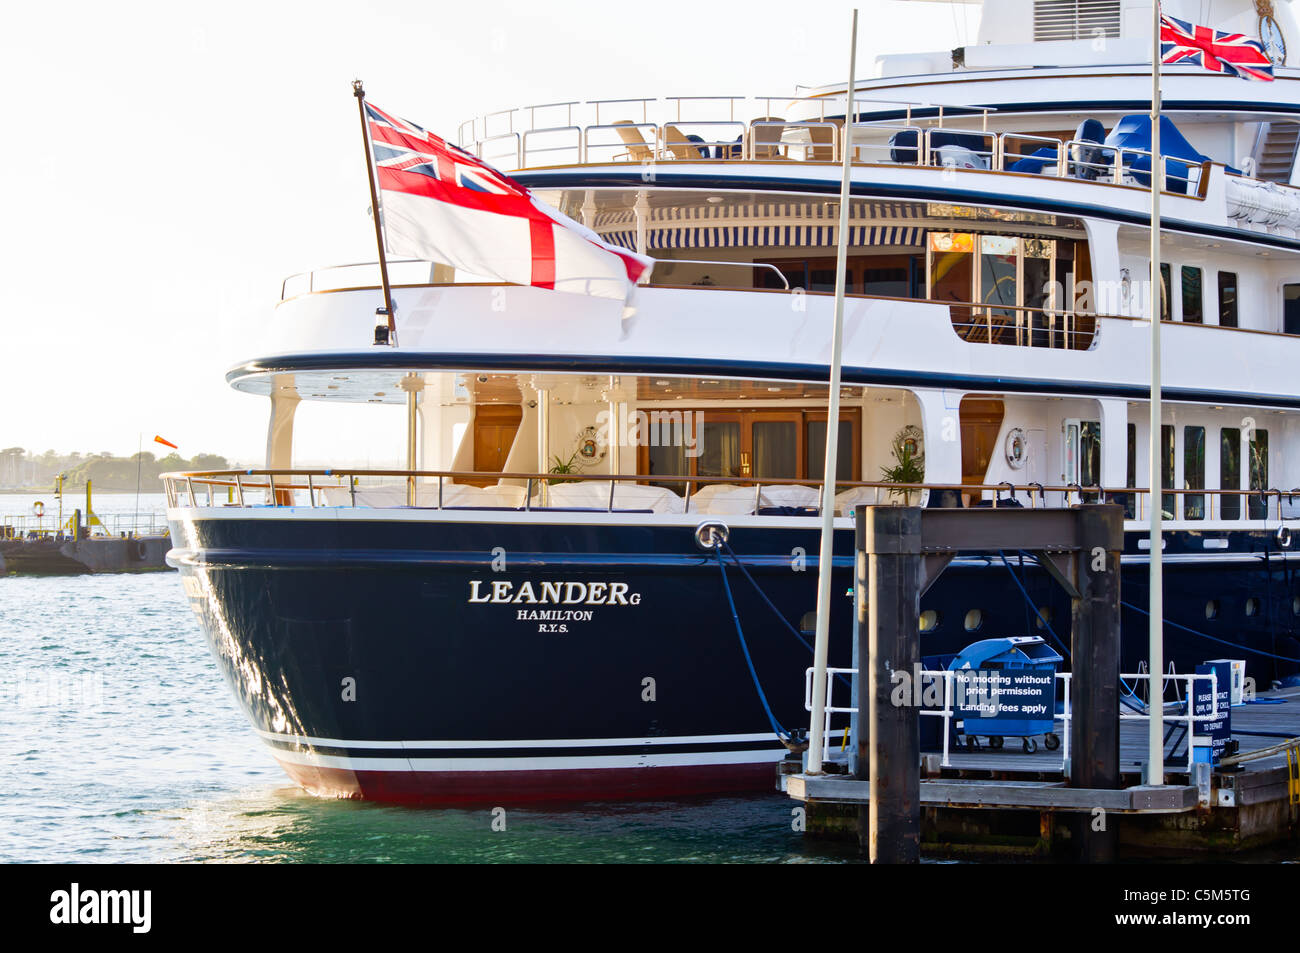 Super yacht Leander G under the White Ensign at Gunwharf Quays, Portsmouth. Stock Photo